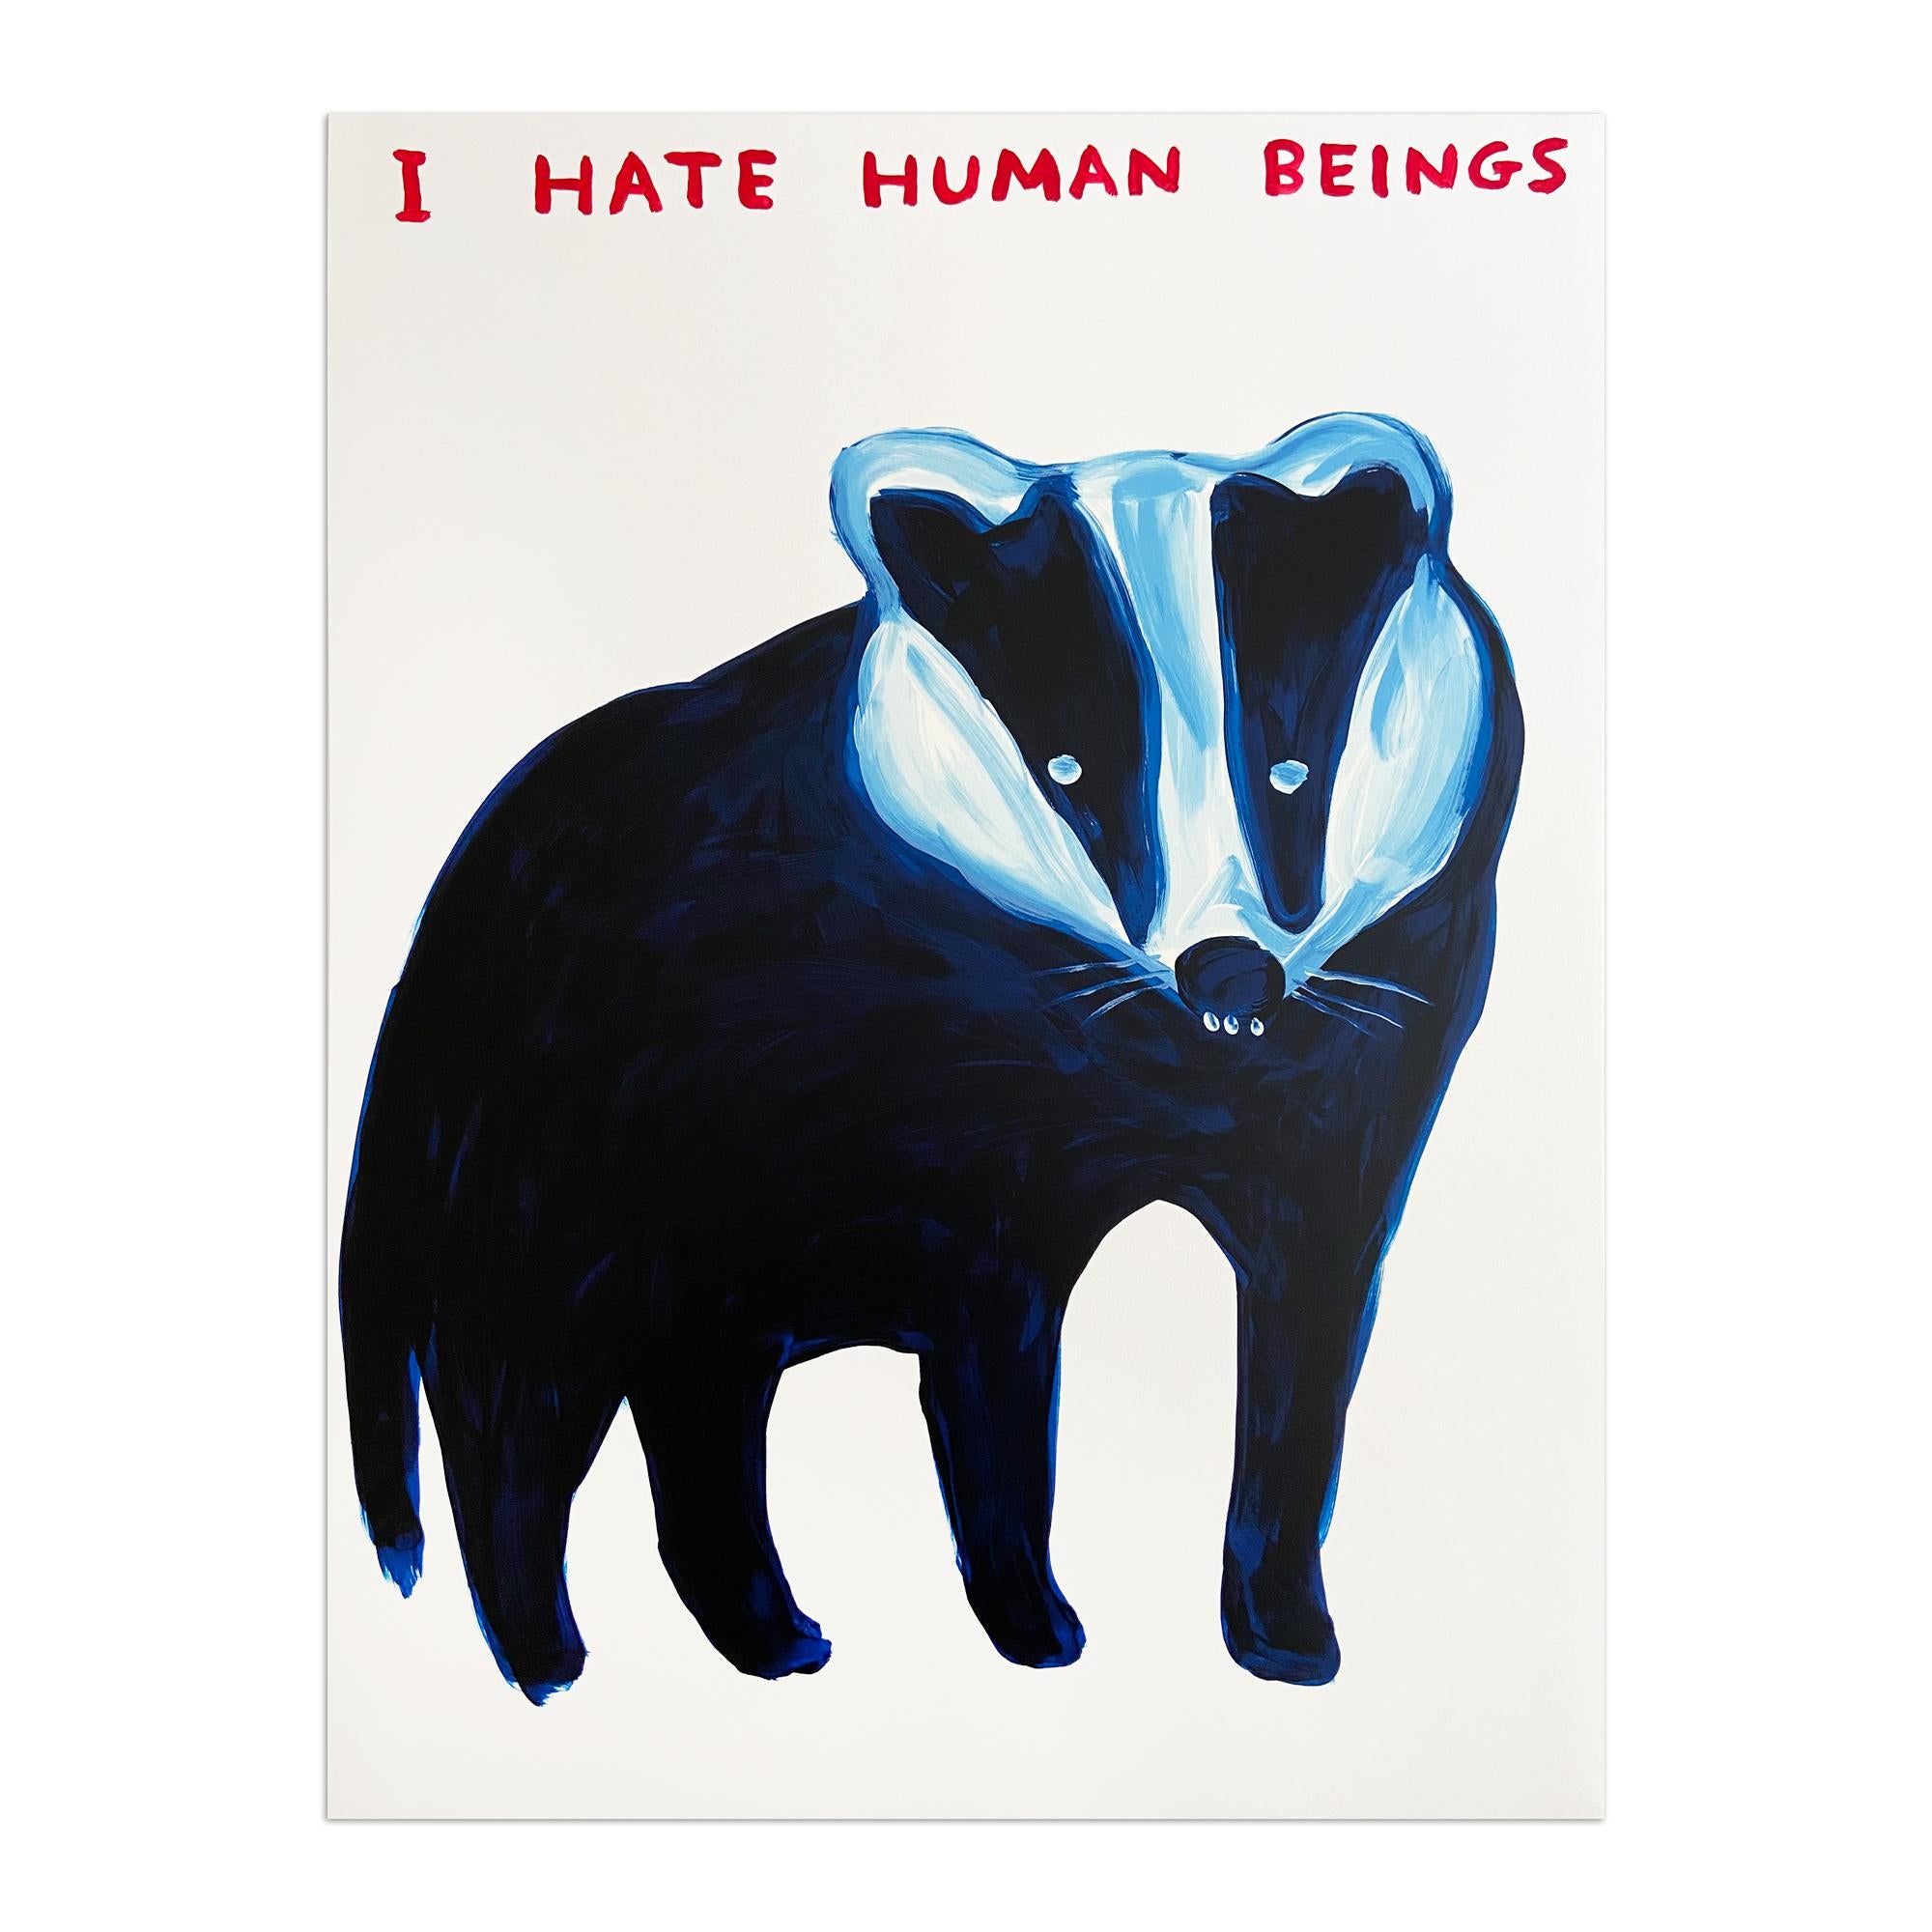 David Shrigley, I Hate Human Beings - Contemporary Pop Art, Signed Print